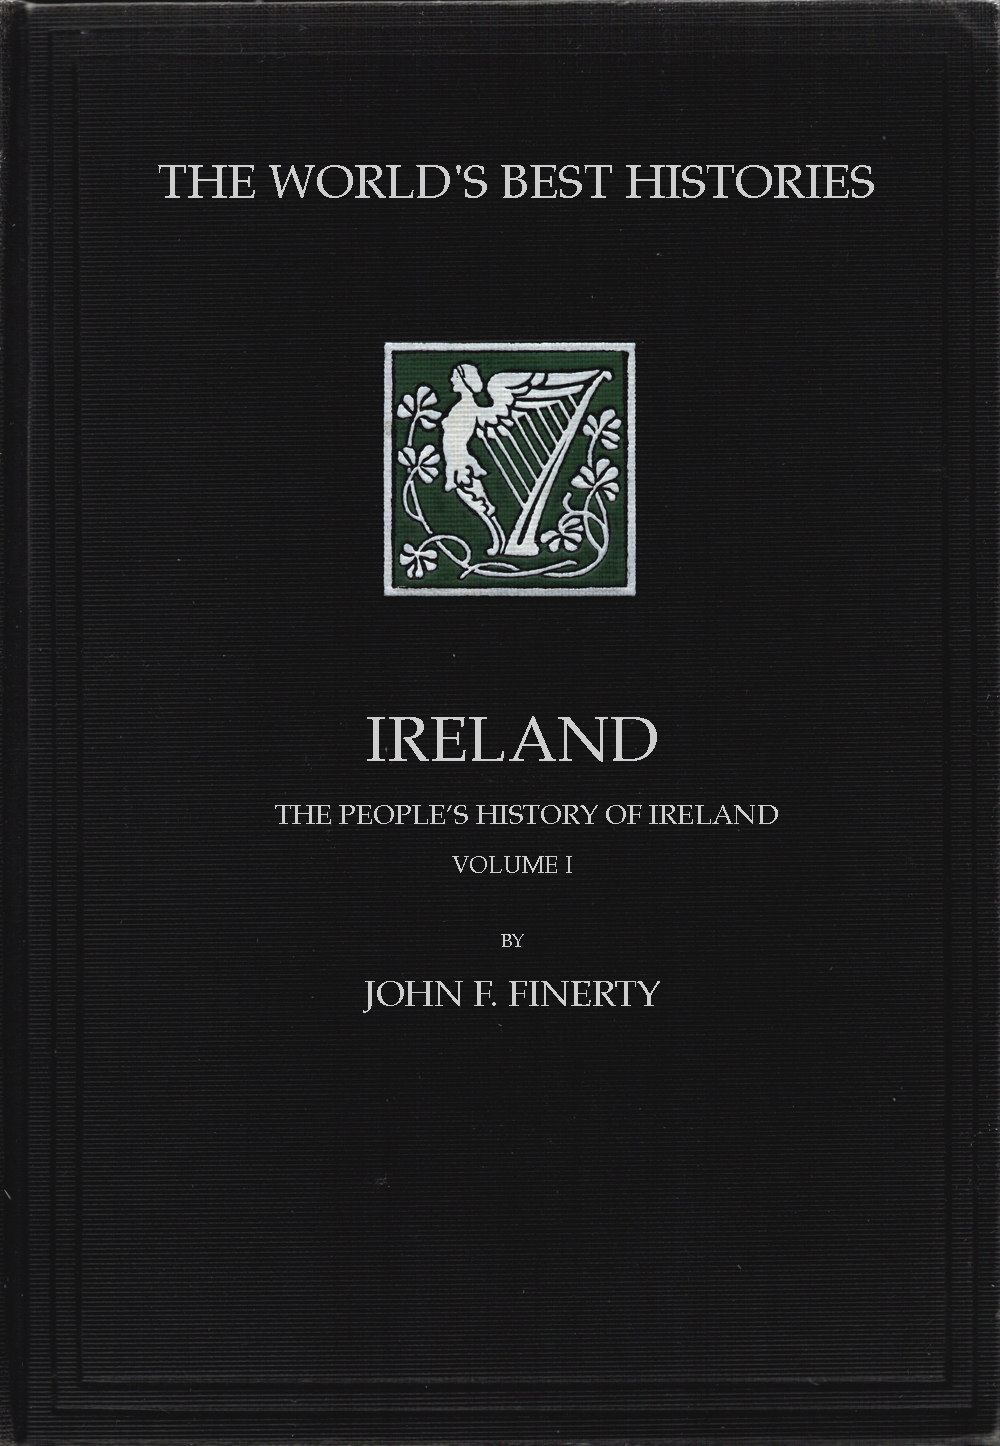 THE KING'S ENGLISH - THE KING'S ENGLISH Poem by Derry O'Sullivan